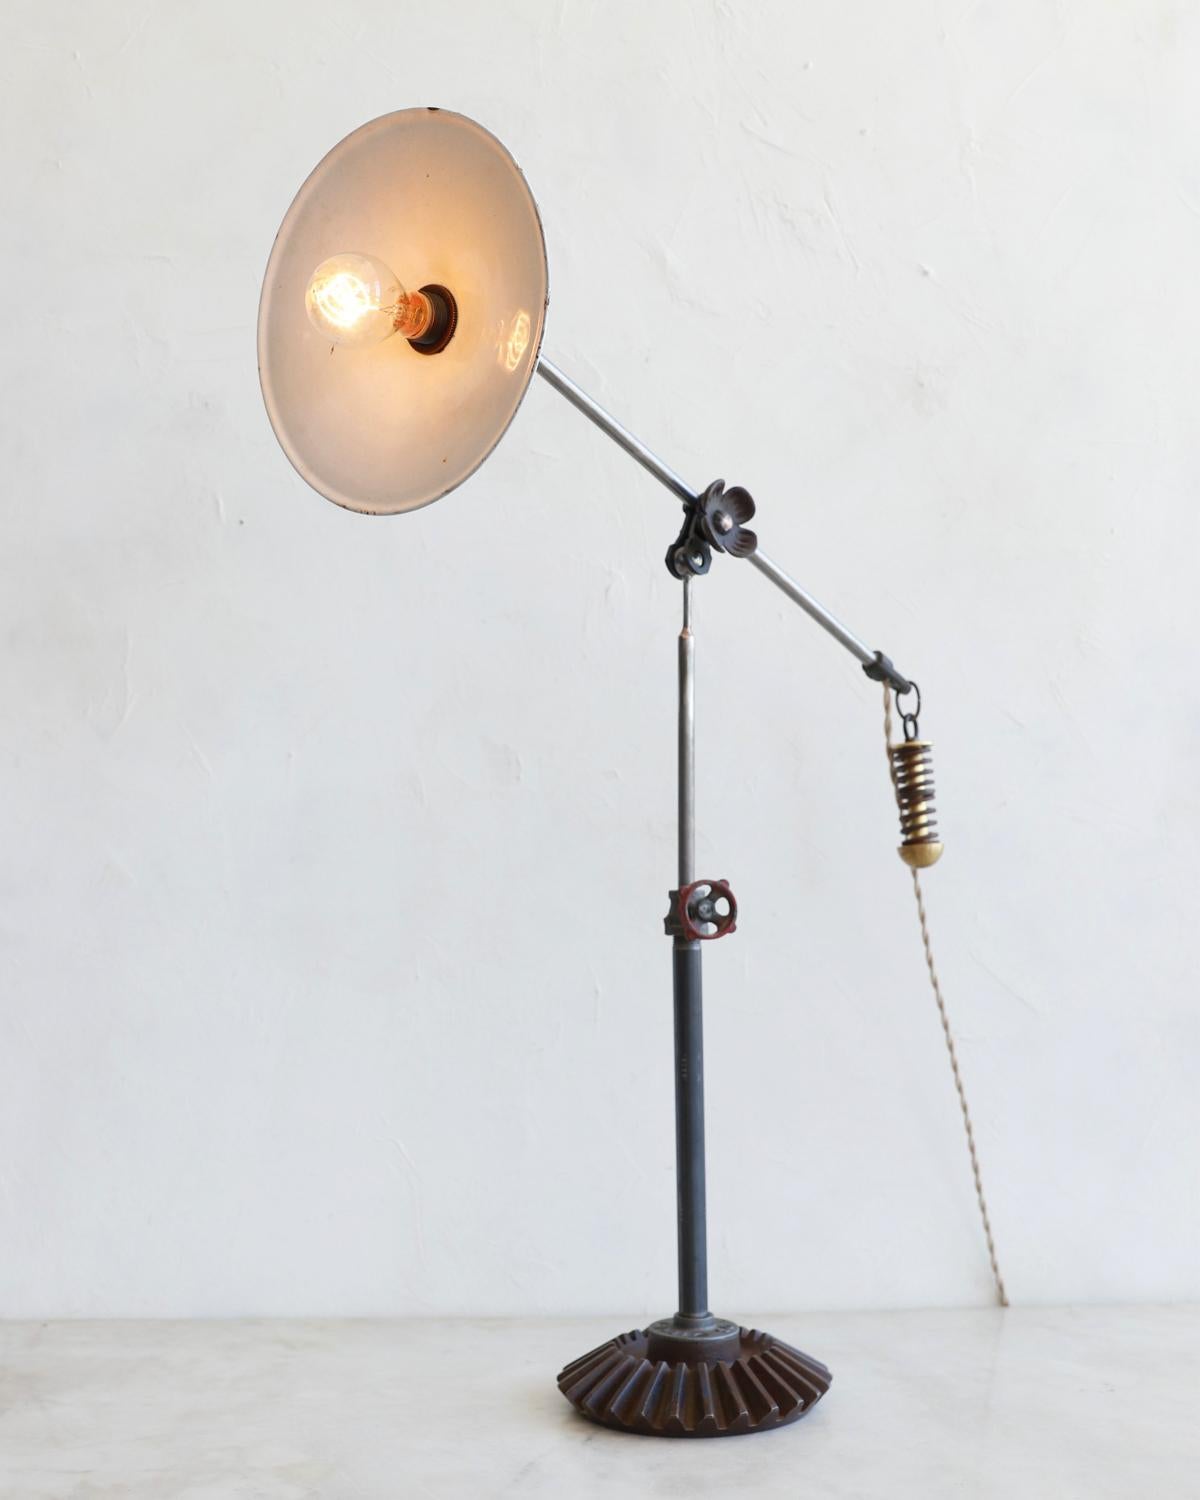 Robert True Ogden's one-of-a-like found object lamps are made by hand in Philadelphia. Crafted from pieces and parts sourced locally and abroad, no two lamps are alike. This table lamp has a vintage enamel shade, vintage gears that lock the